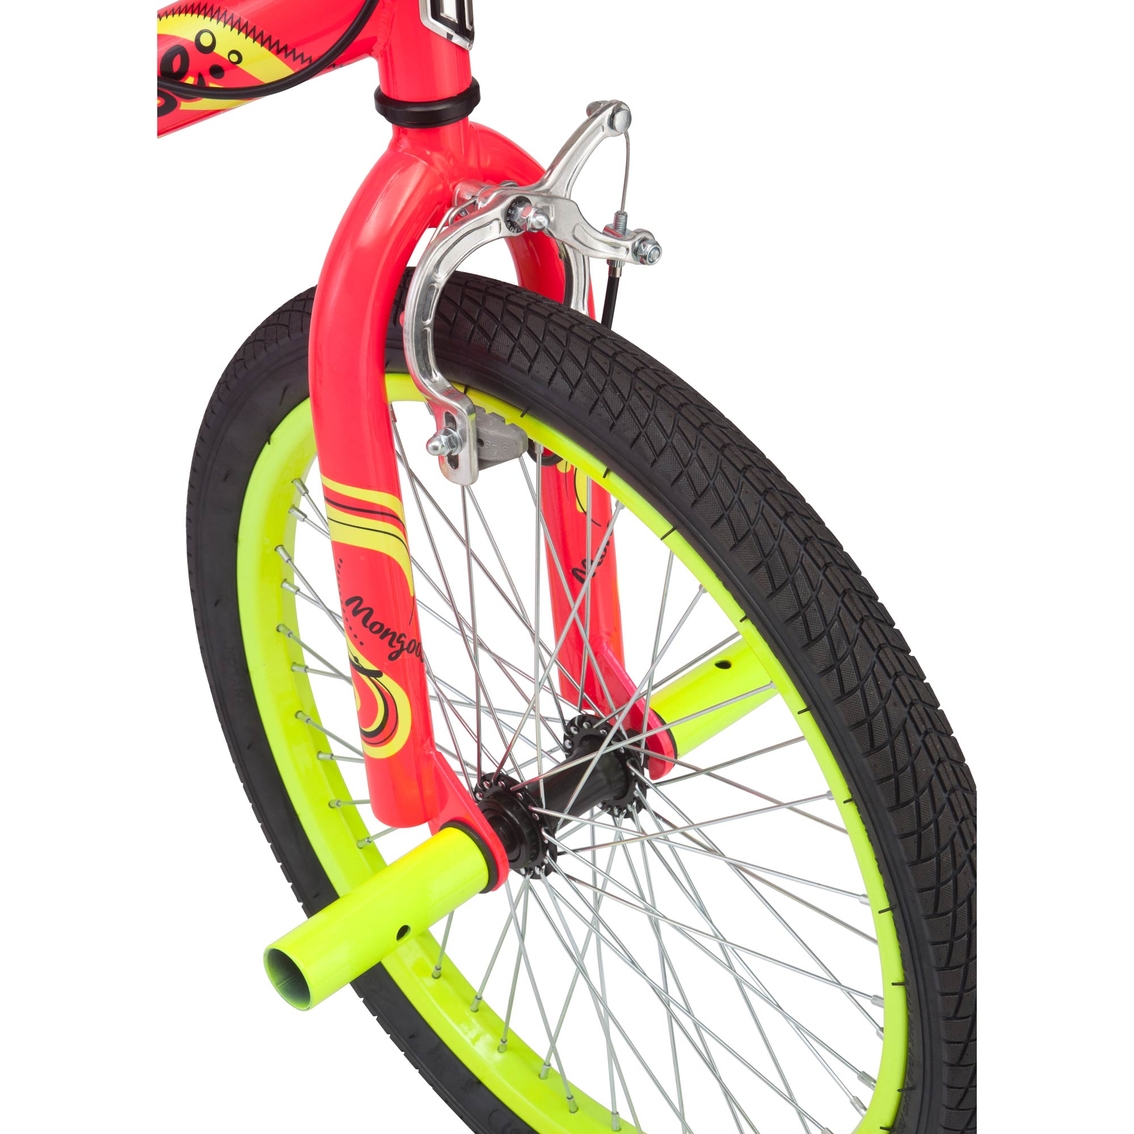 Mongoose Slyde 20 In. Girls Freestyle Bike - Image 2 of 4